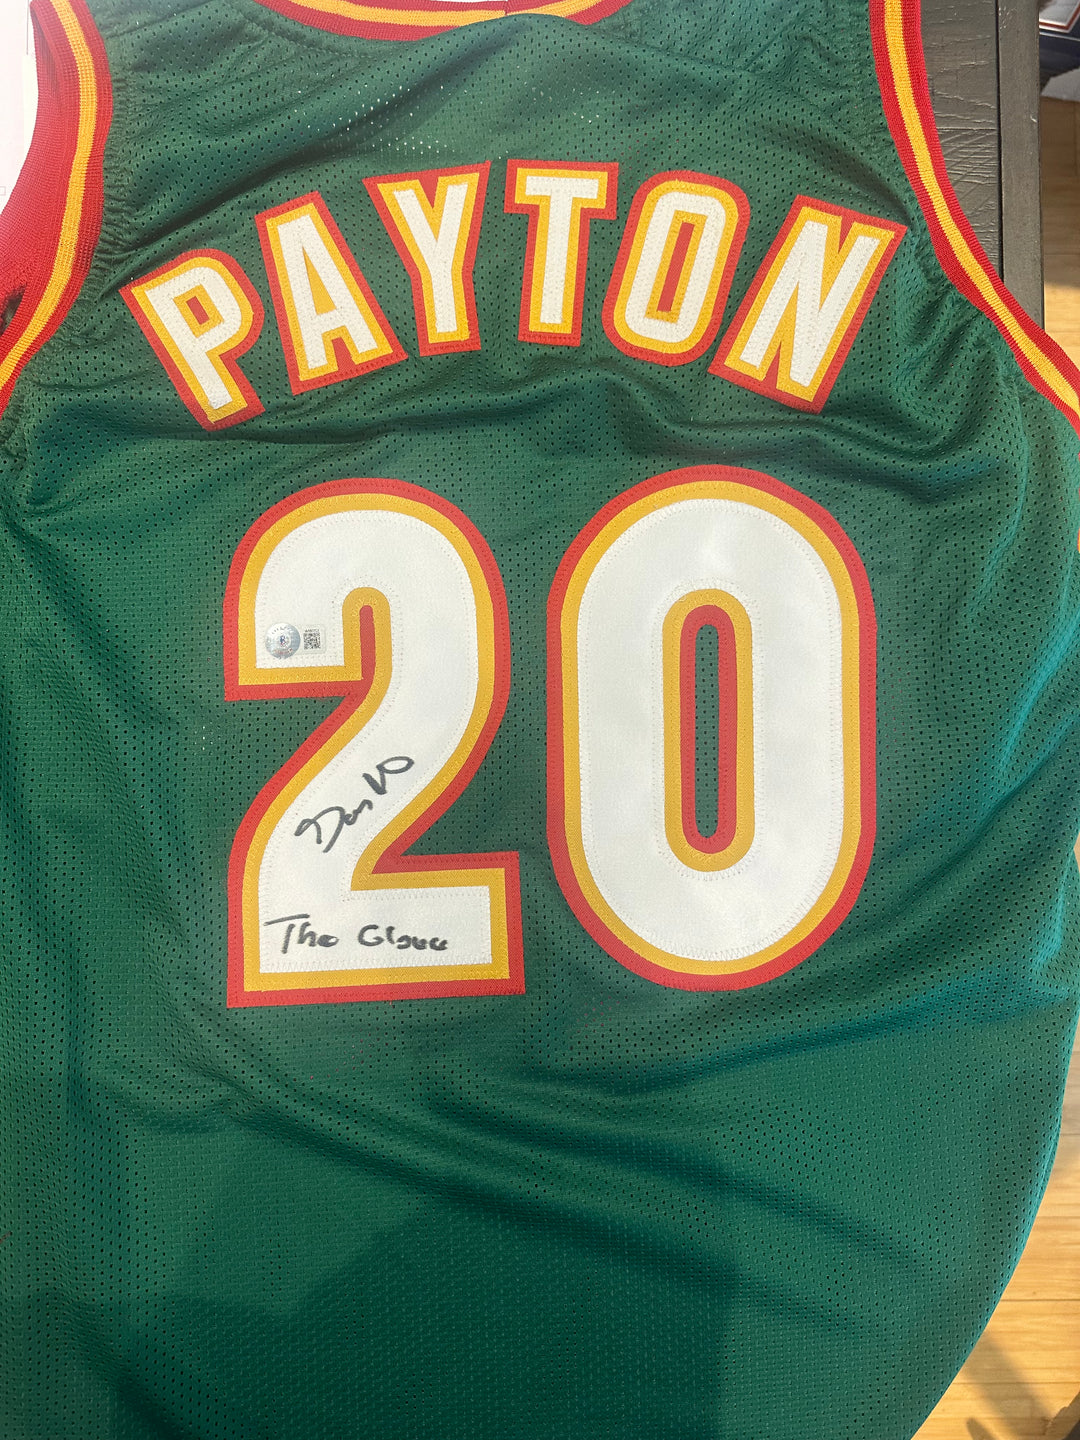 Gary Payton signed custom Sonics jersey with "The Glove" ins